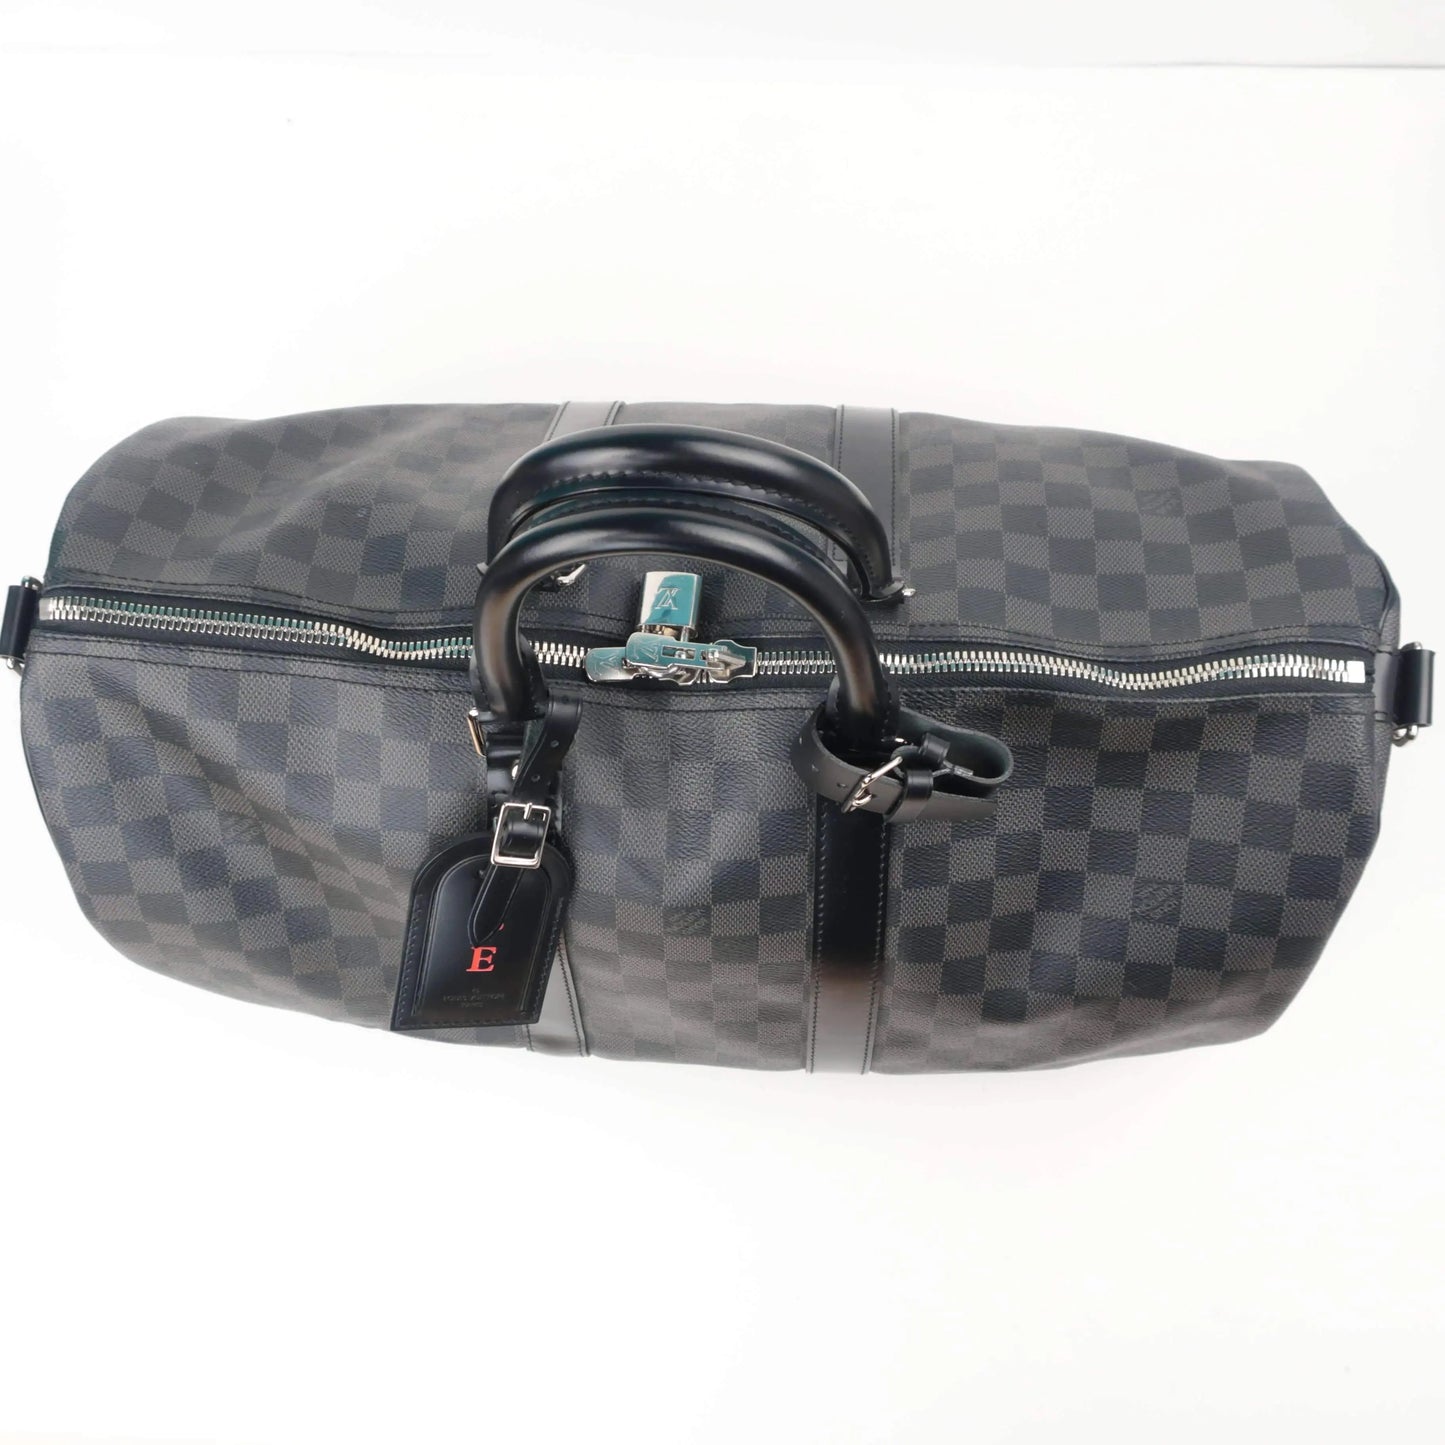 Load image into Gallery viewer, Louis Vuitton Louis Vuitton Keepall 45 Bandouliere Damier Graphite LVBagaholic
